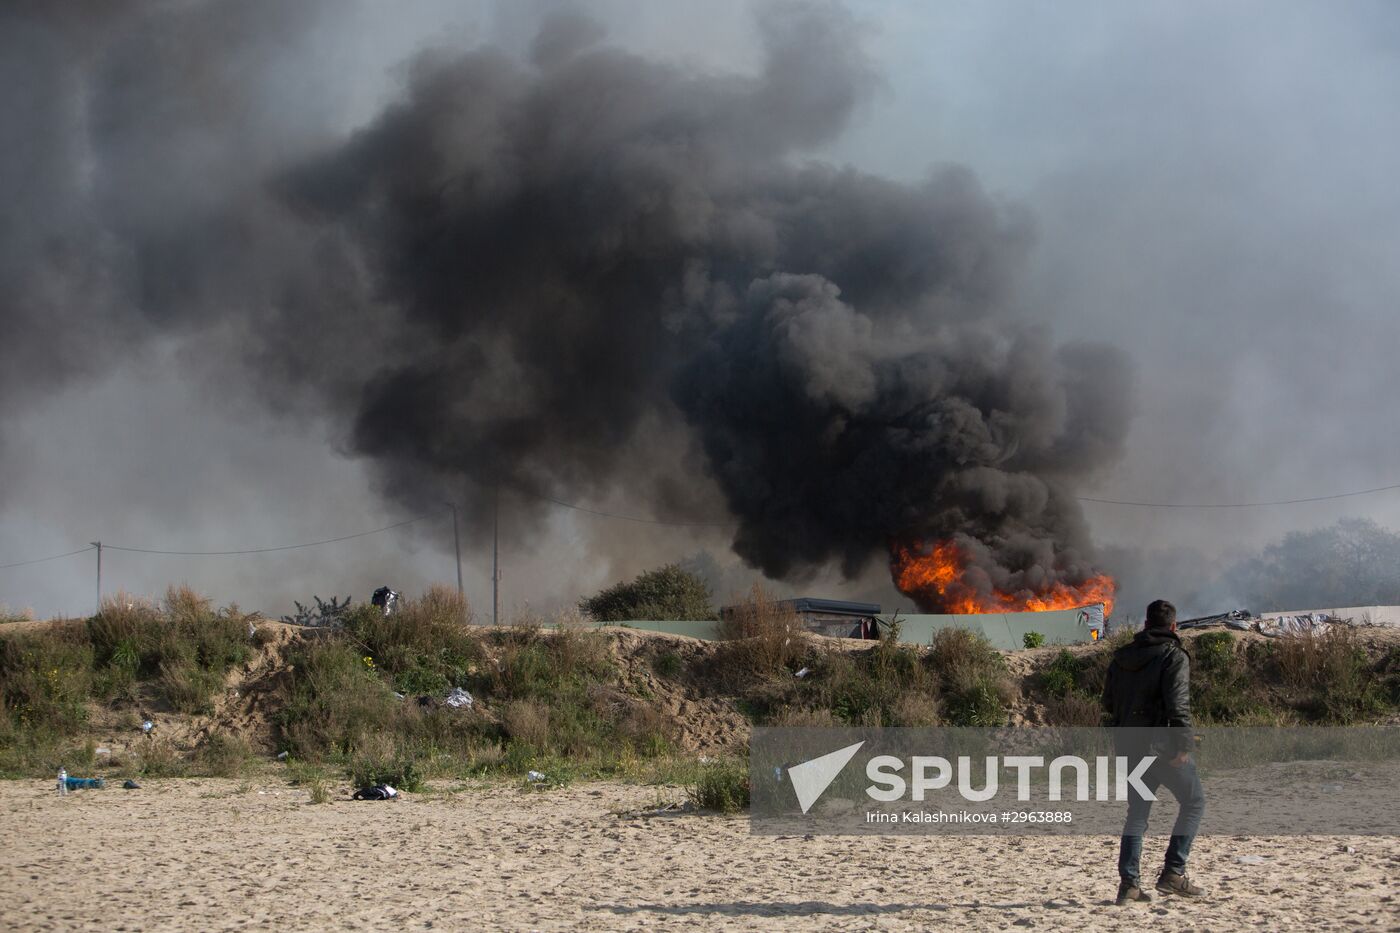 Relocation continues at Jungle spontaneous refugee camp in Calais, France